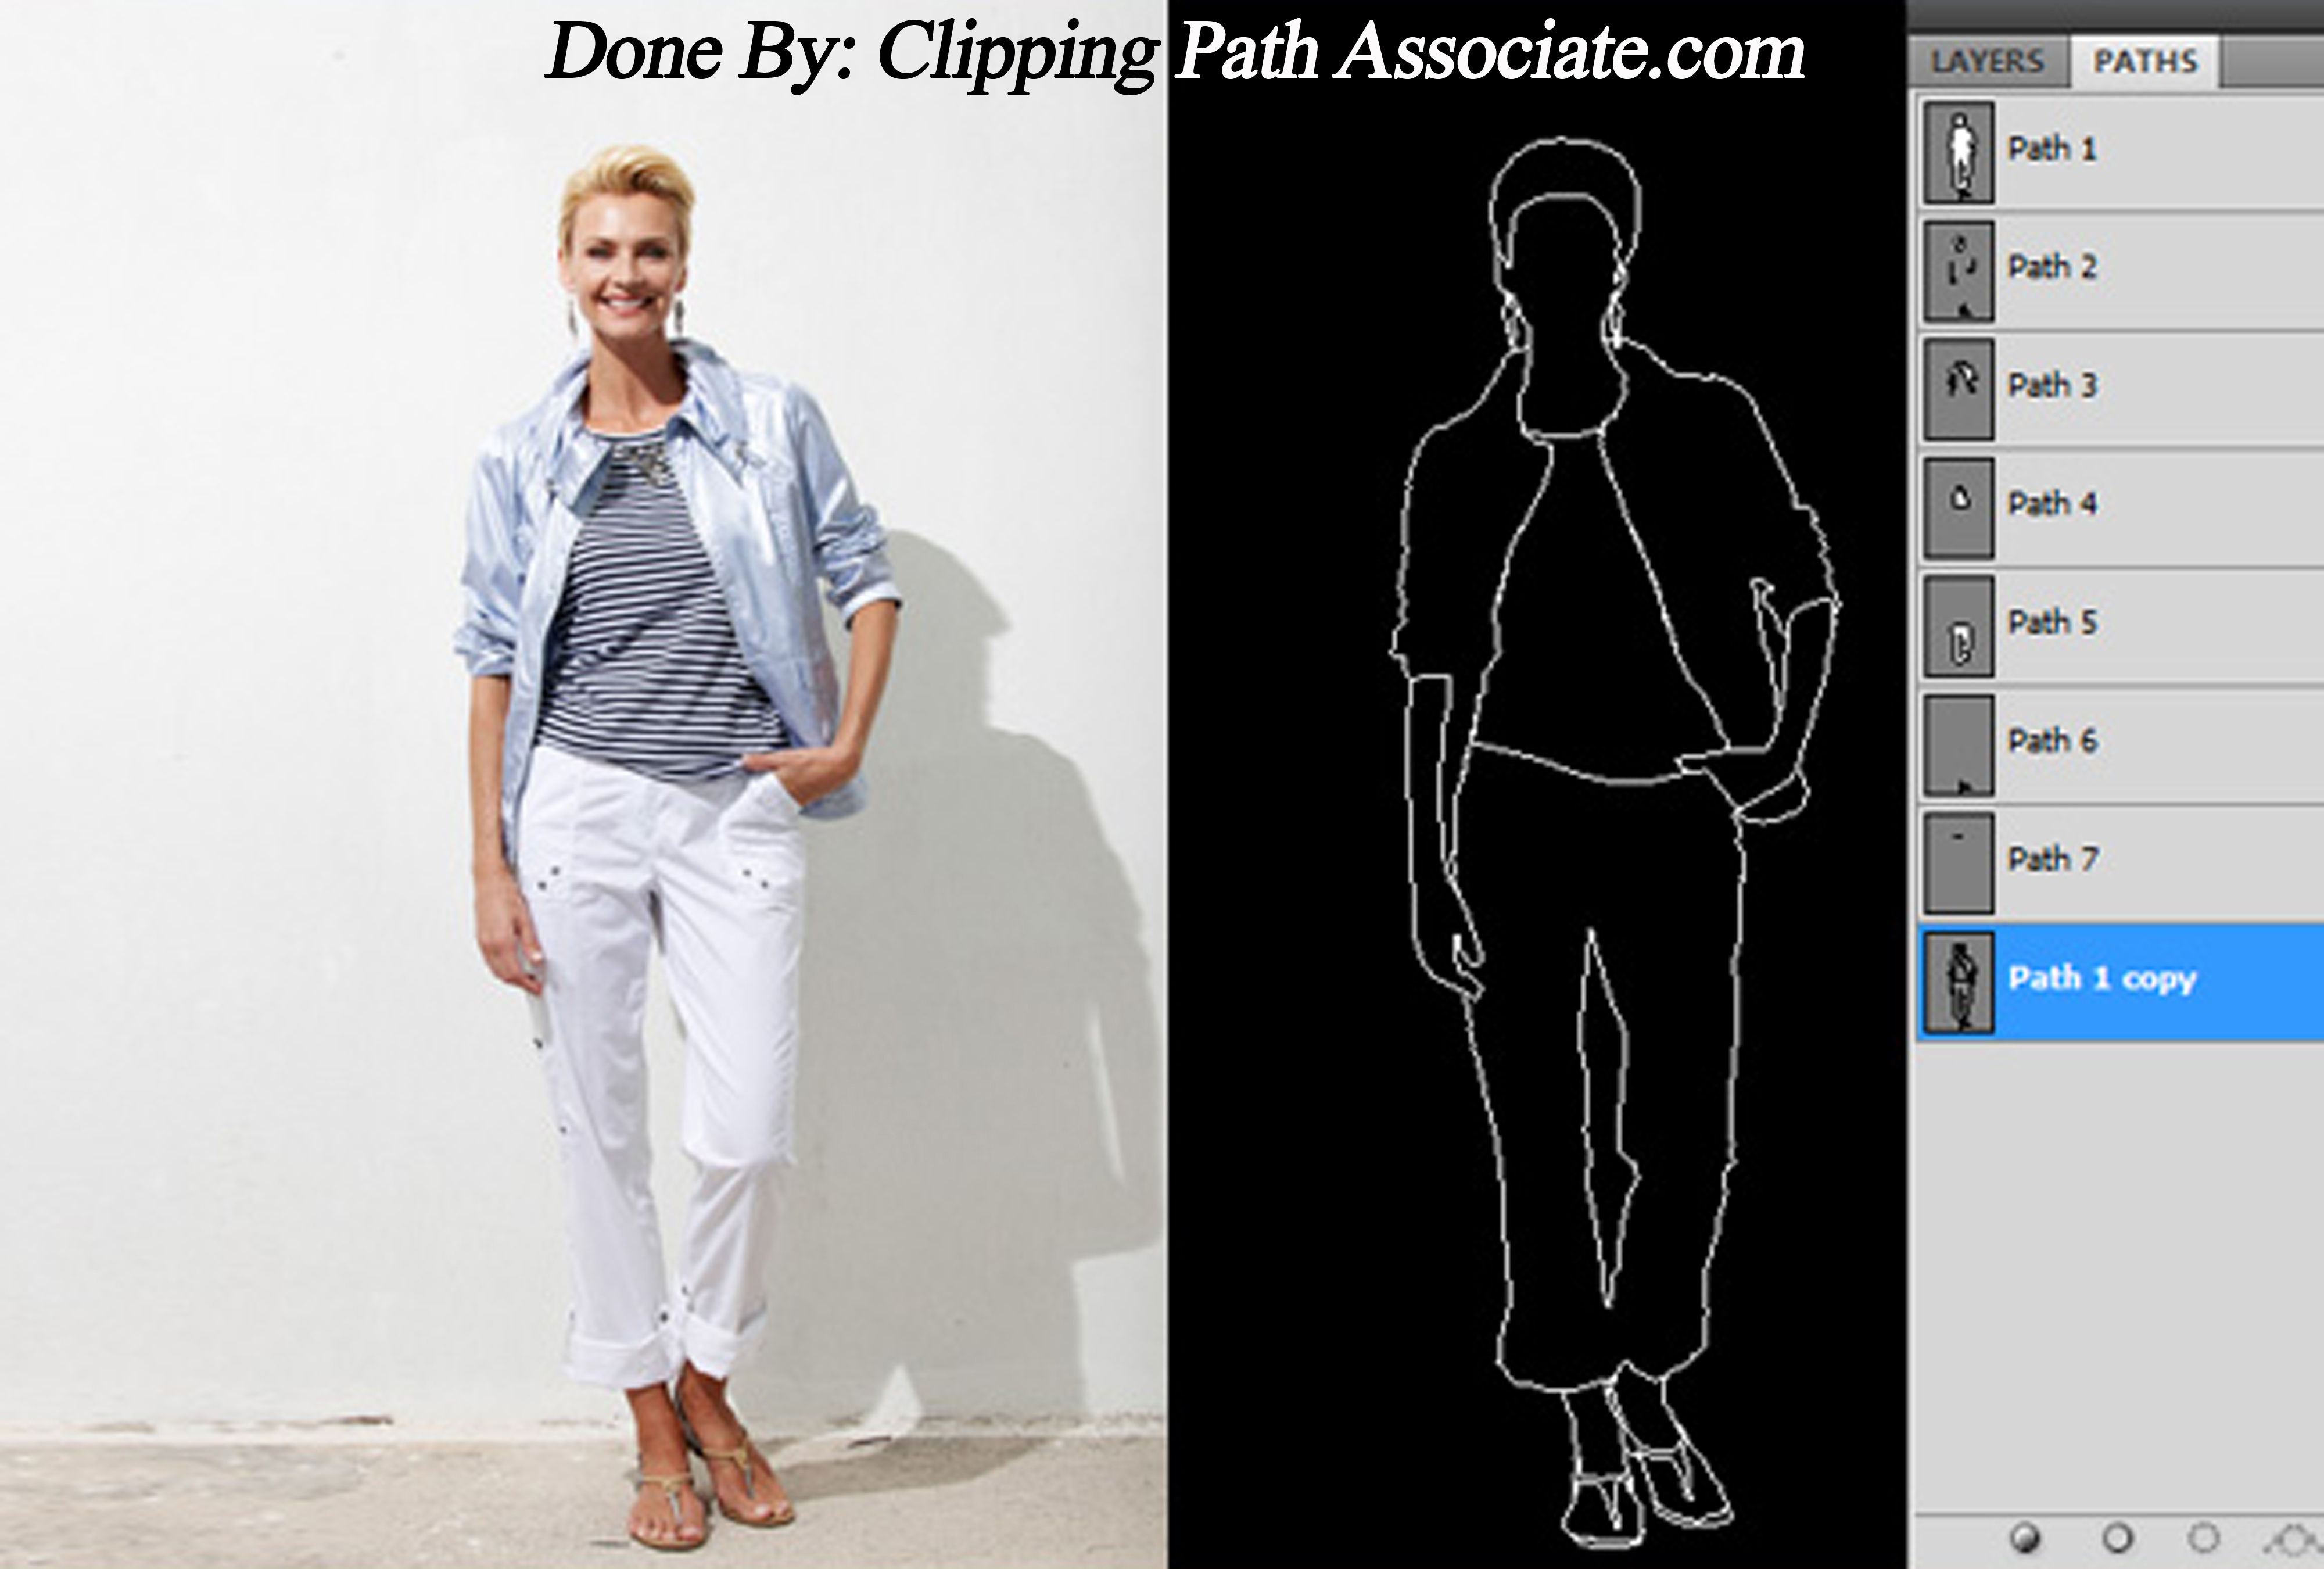 clipping path service 